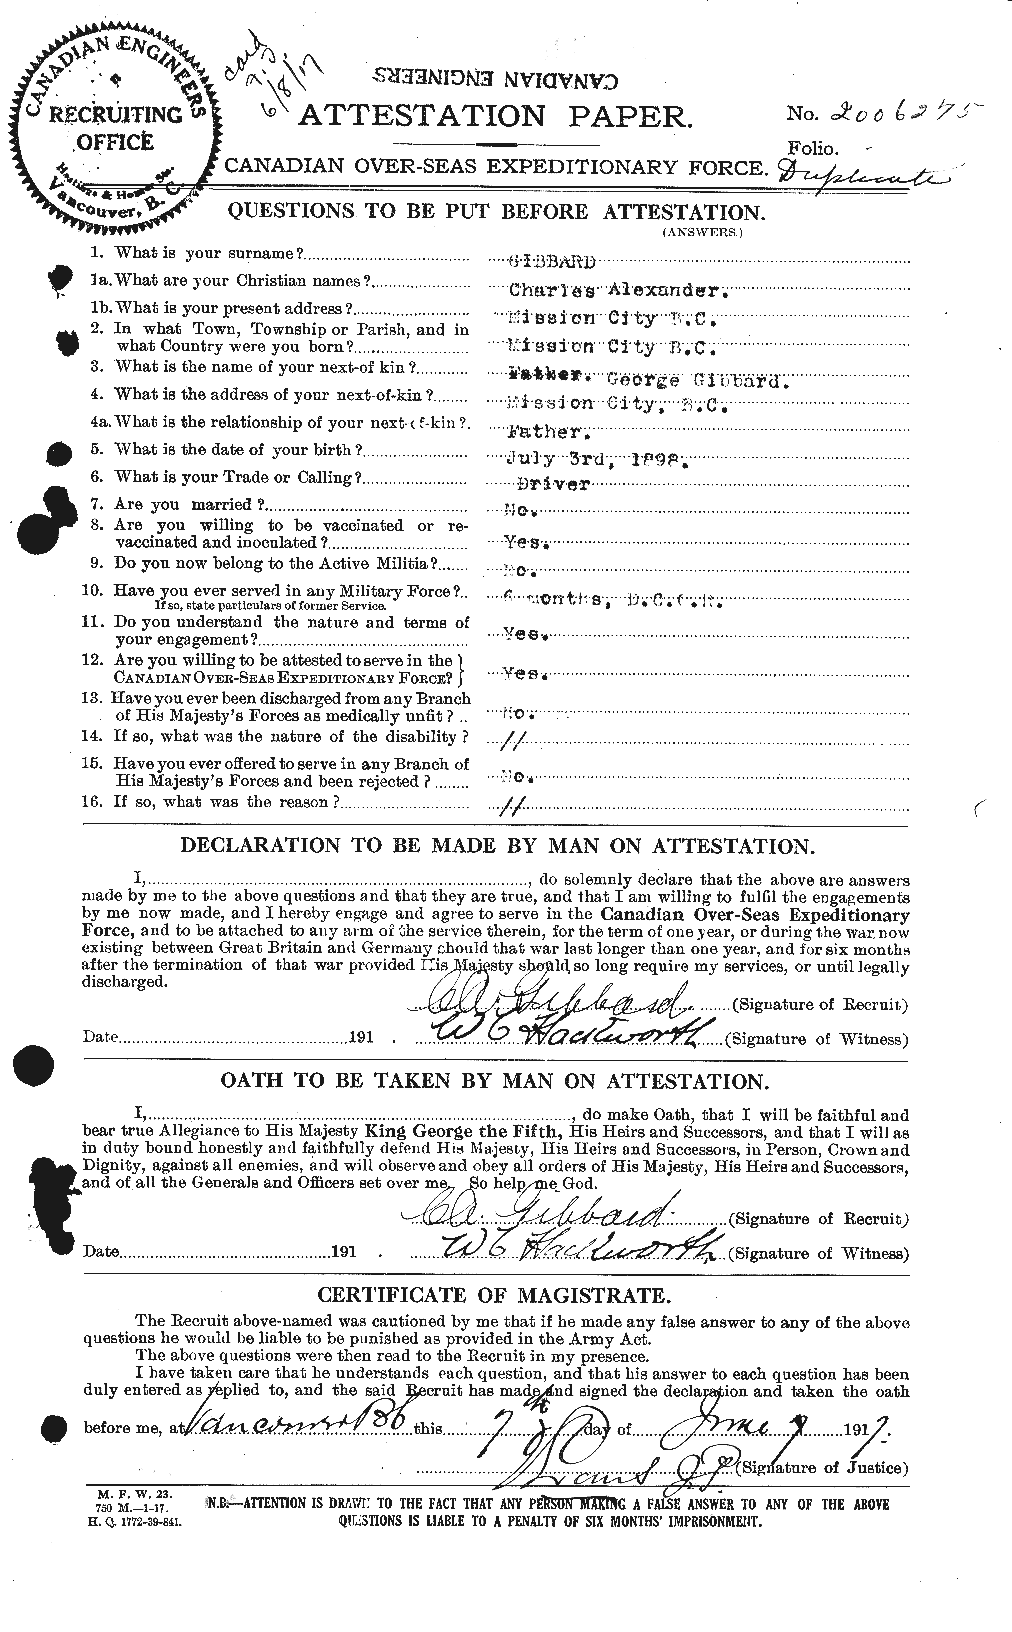 Personnel Records of the First World War - CEF 347885a